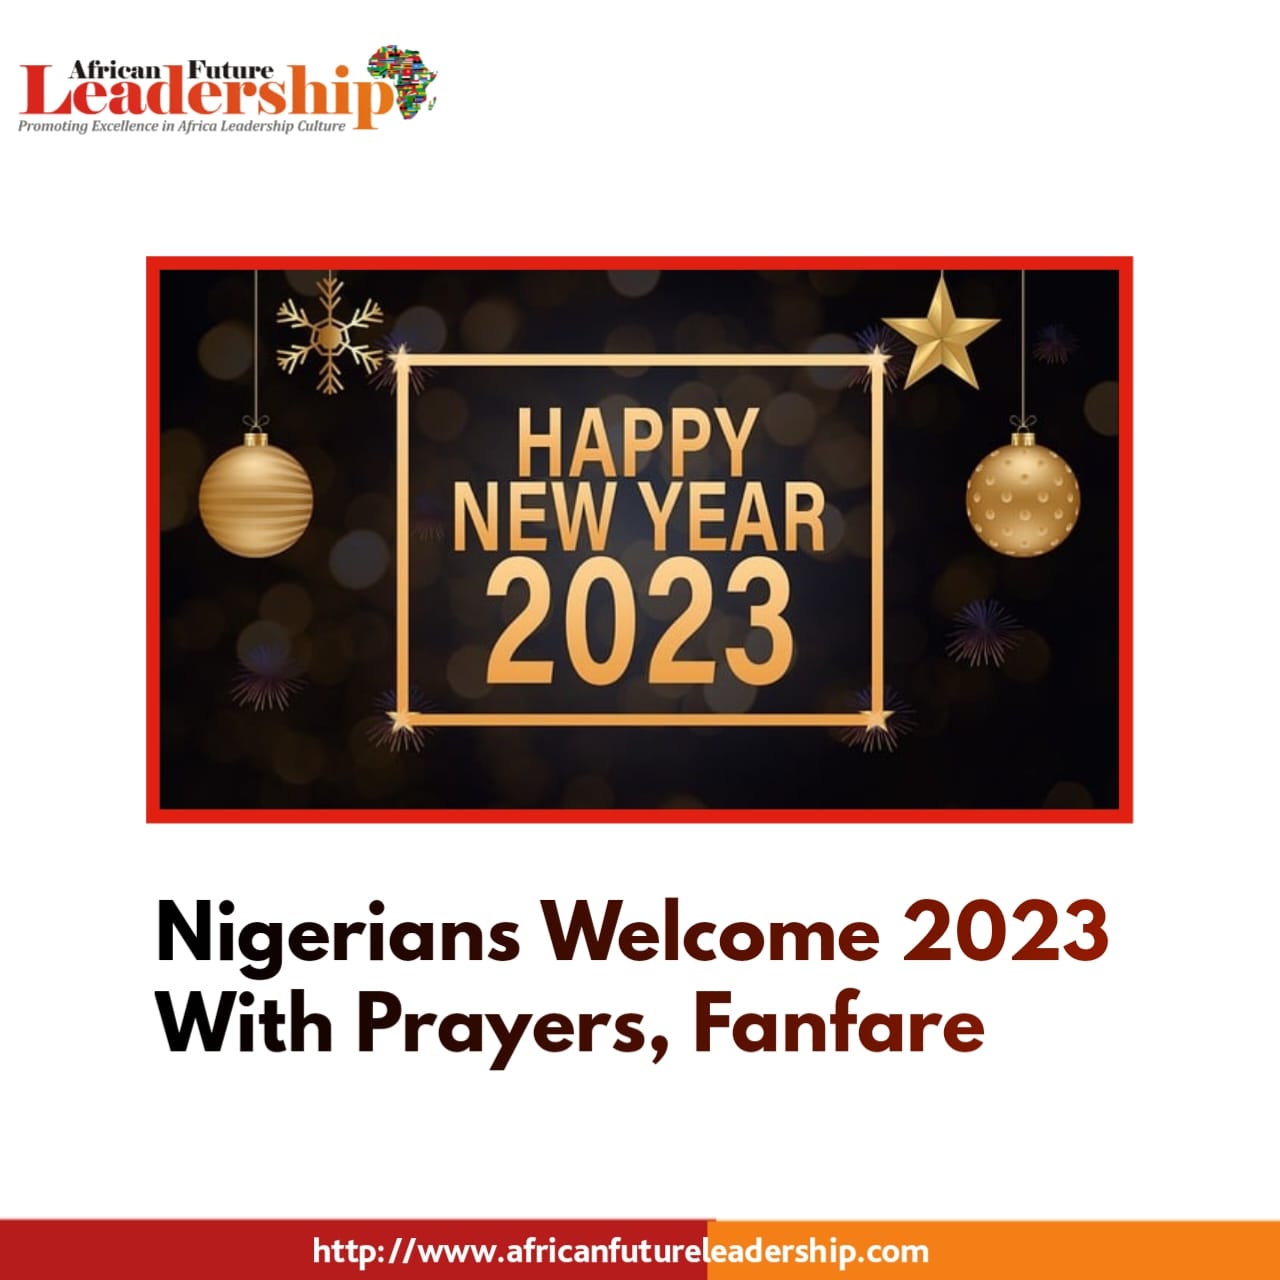 Nigerians Welcome 2023 With Prayers, Fanfare